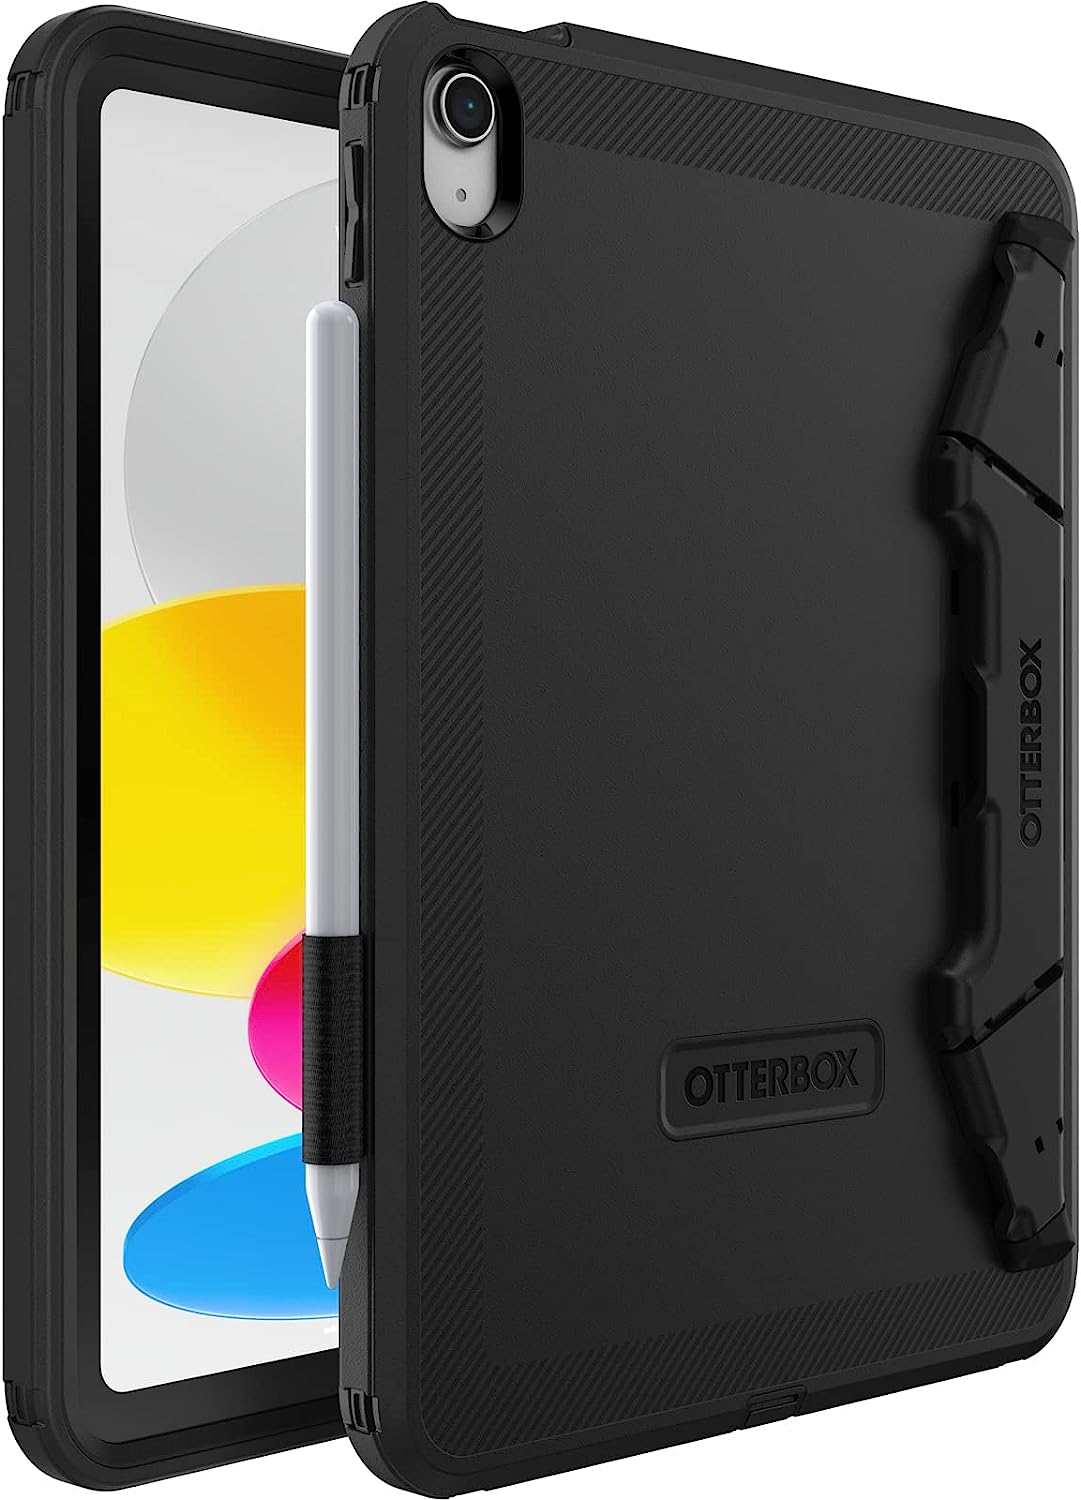 OtterBox DEFENDER SERIES with Kickstand And Screen Protection for iPad 10th Gen (New)